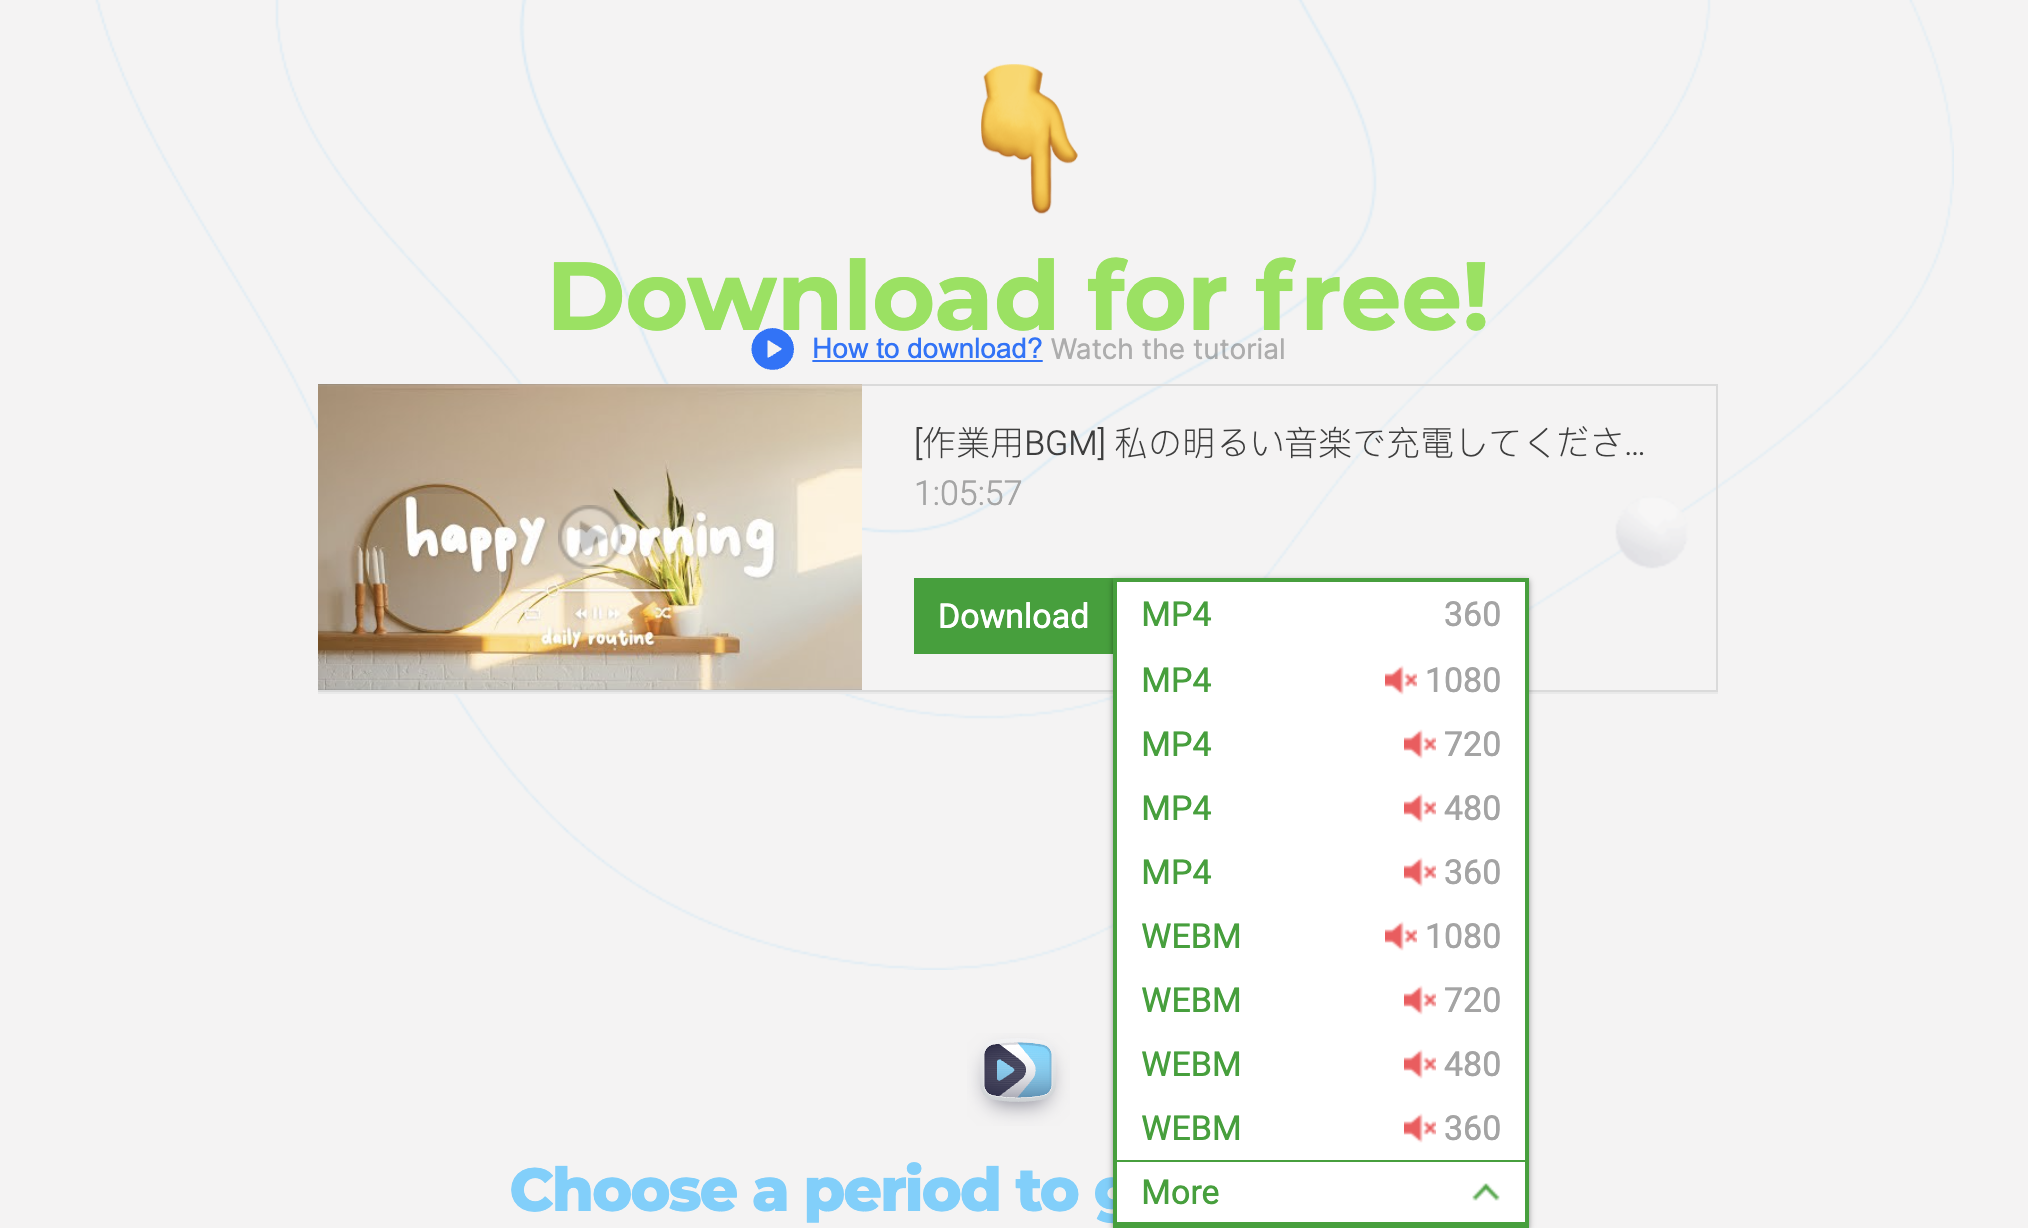 You can choose the quality and format of the video to complete the download.